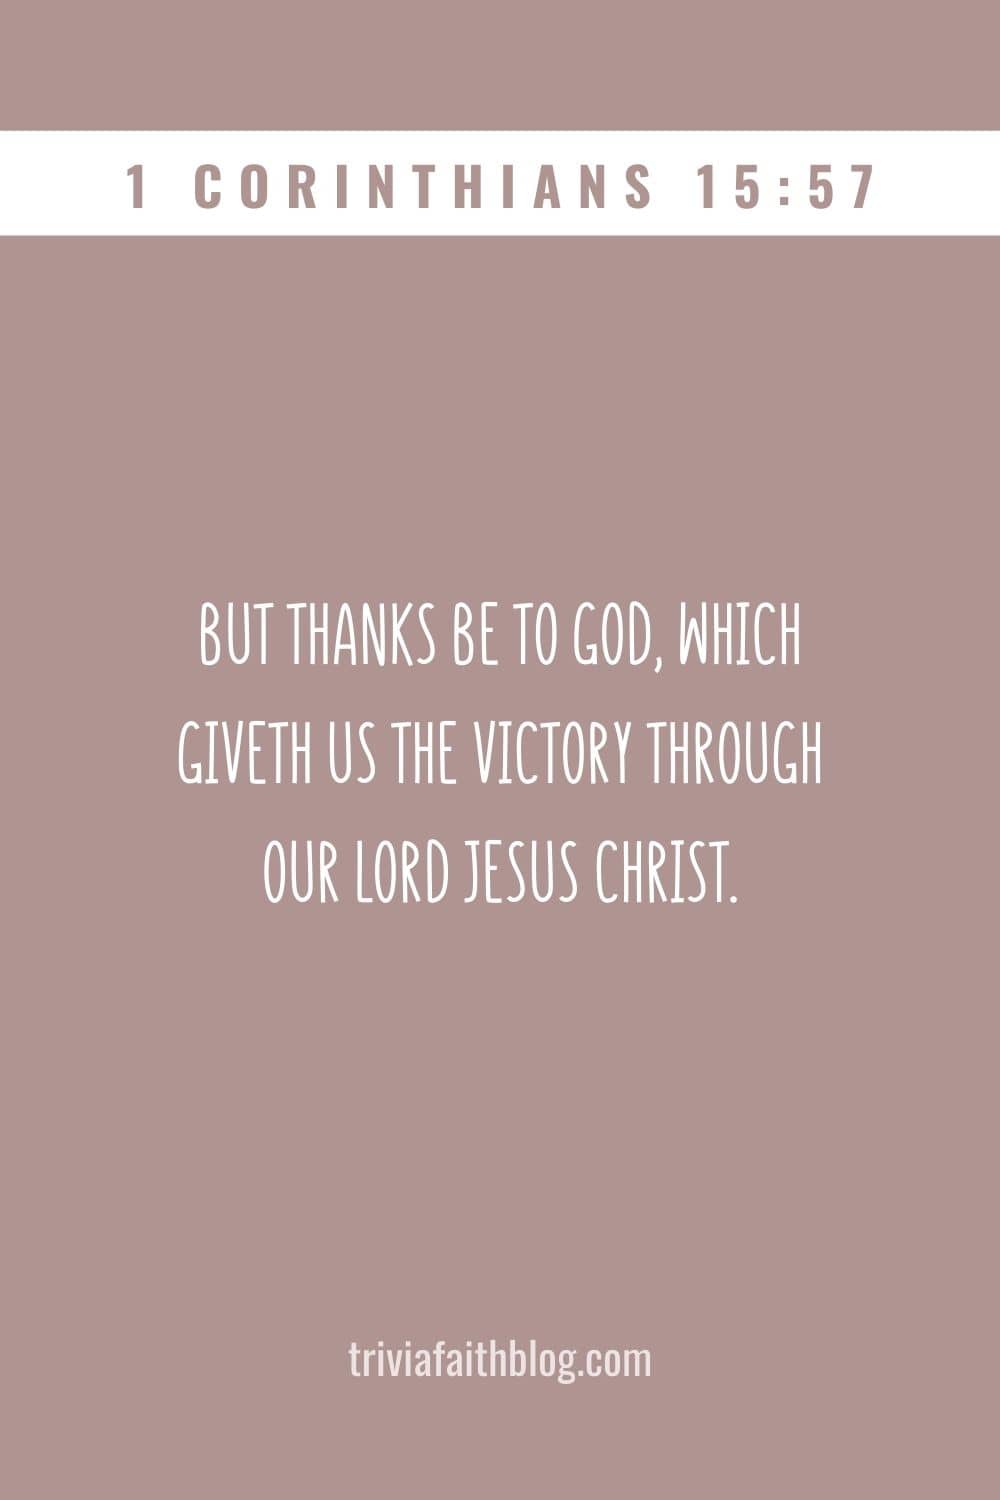 But thanks be to God, which giveth us the victory through our Lord Jesus Christ